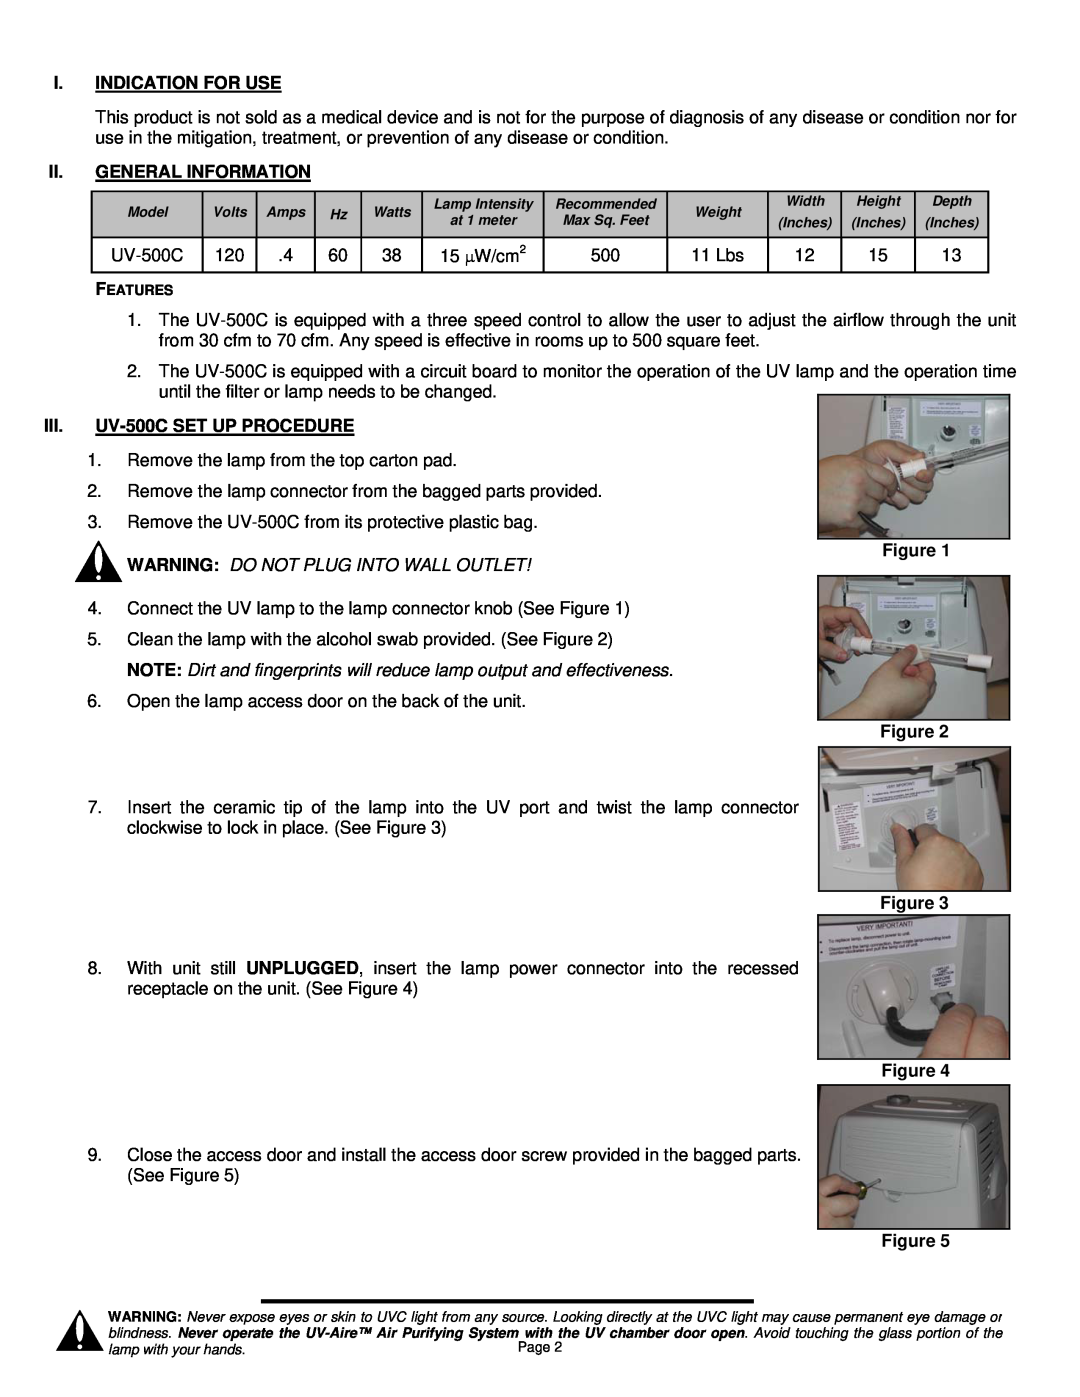 Field Controls installation instructions I.Indication For Use, General Information, UV-500CSET UP PROCEDURE 